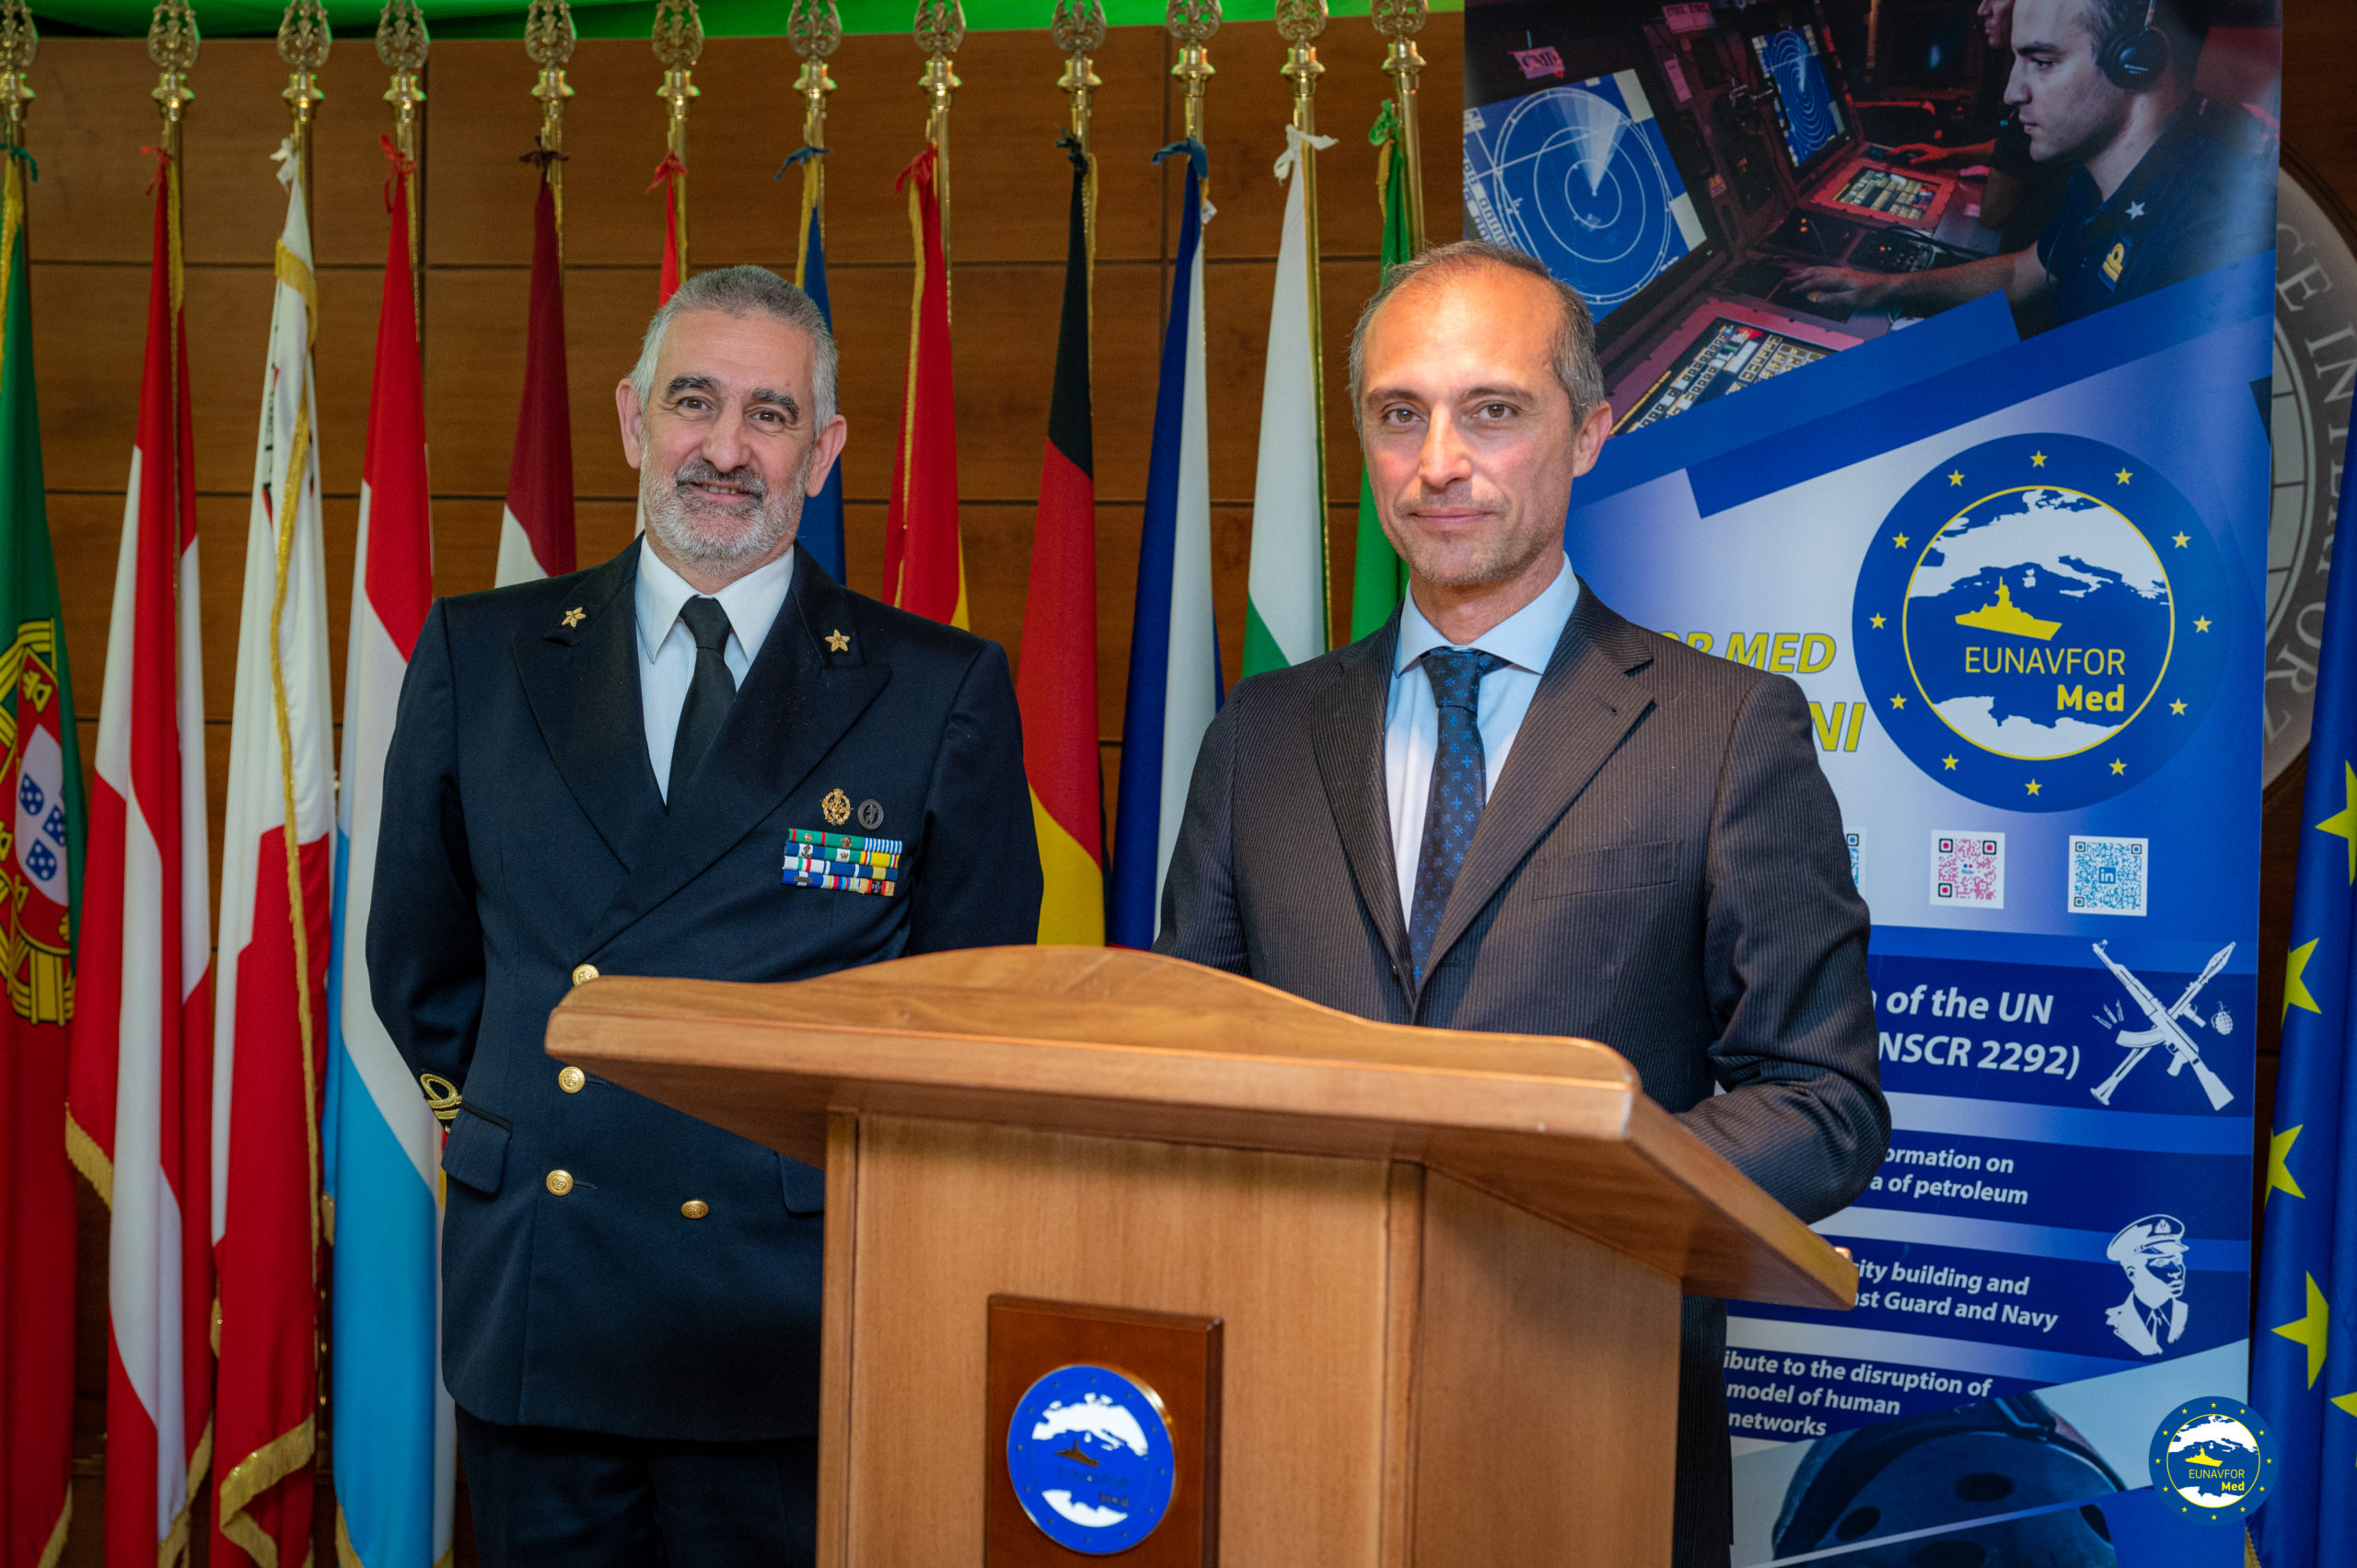 Deputy Political Director and Principal Director for UN and Human Rights at the Ministry of Foreign Affairs and International Cooperation of Italy, Mr. Gianluca Alberini, Visited EUNAVFOR MED IRINI OHQ